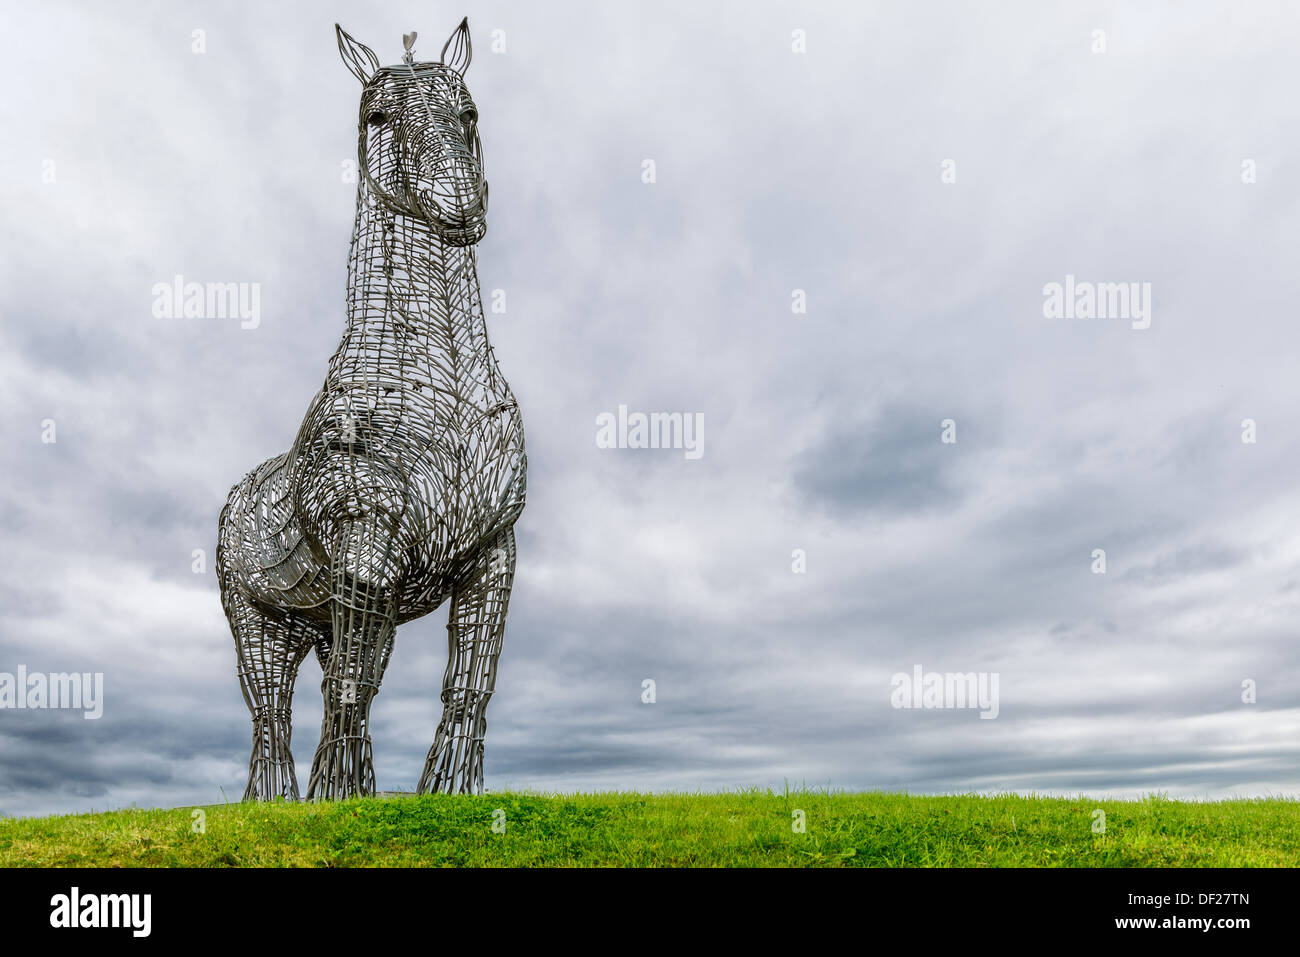 Glasgow, Scotland. 28th of august, 2013: 'The Heavy Horse' by Andy Scott is a sculpture of a Clydesdale Horse Stock Photo